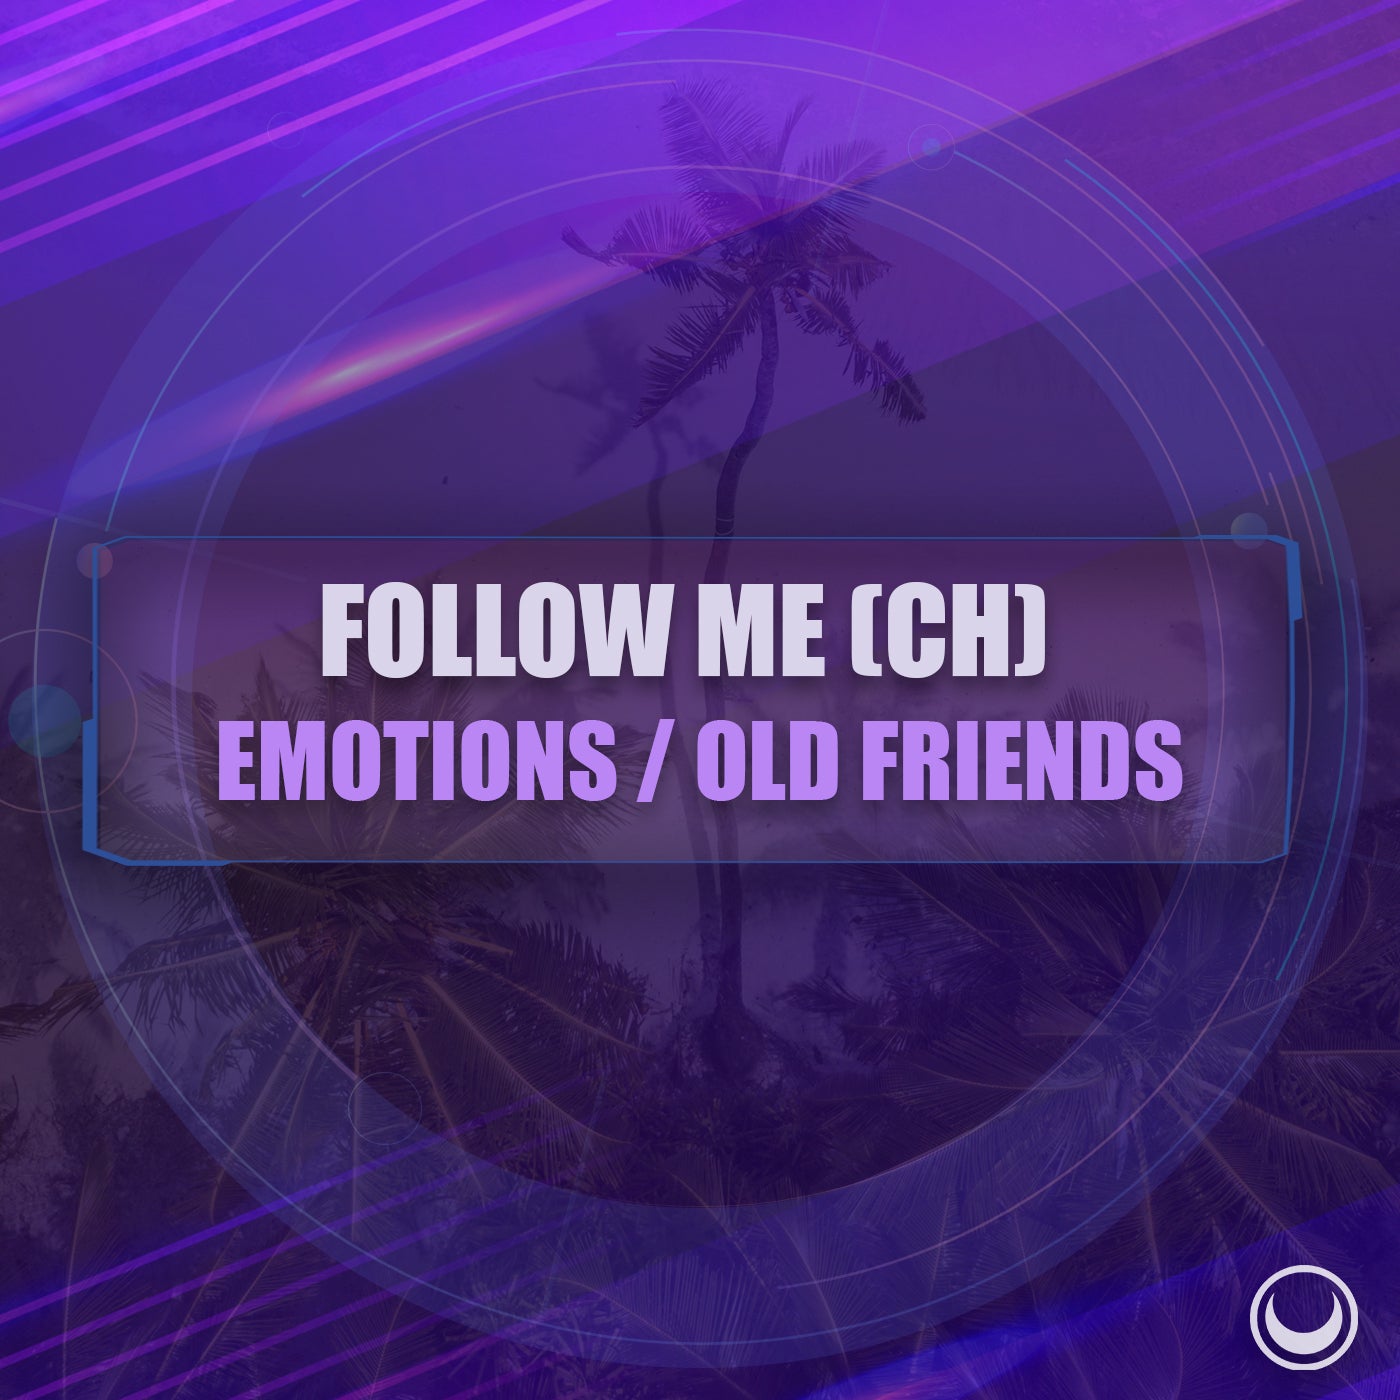 Emotions / Old Friends